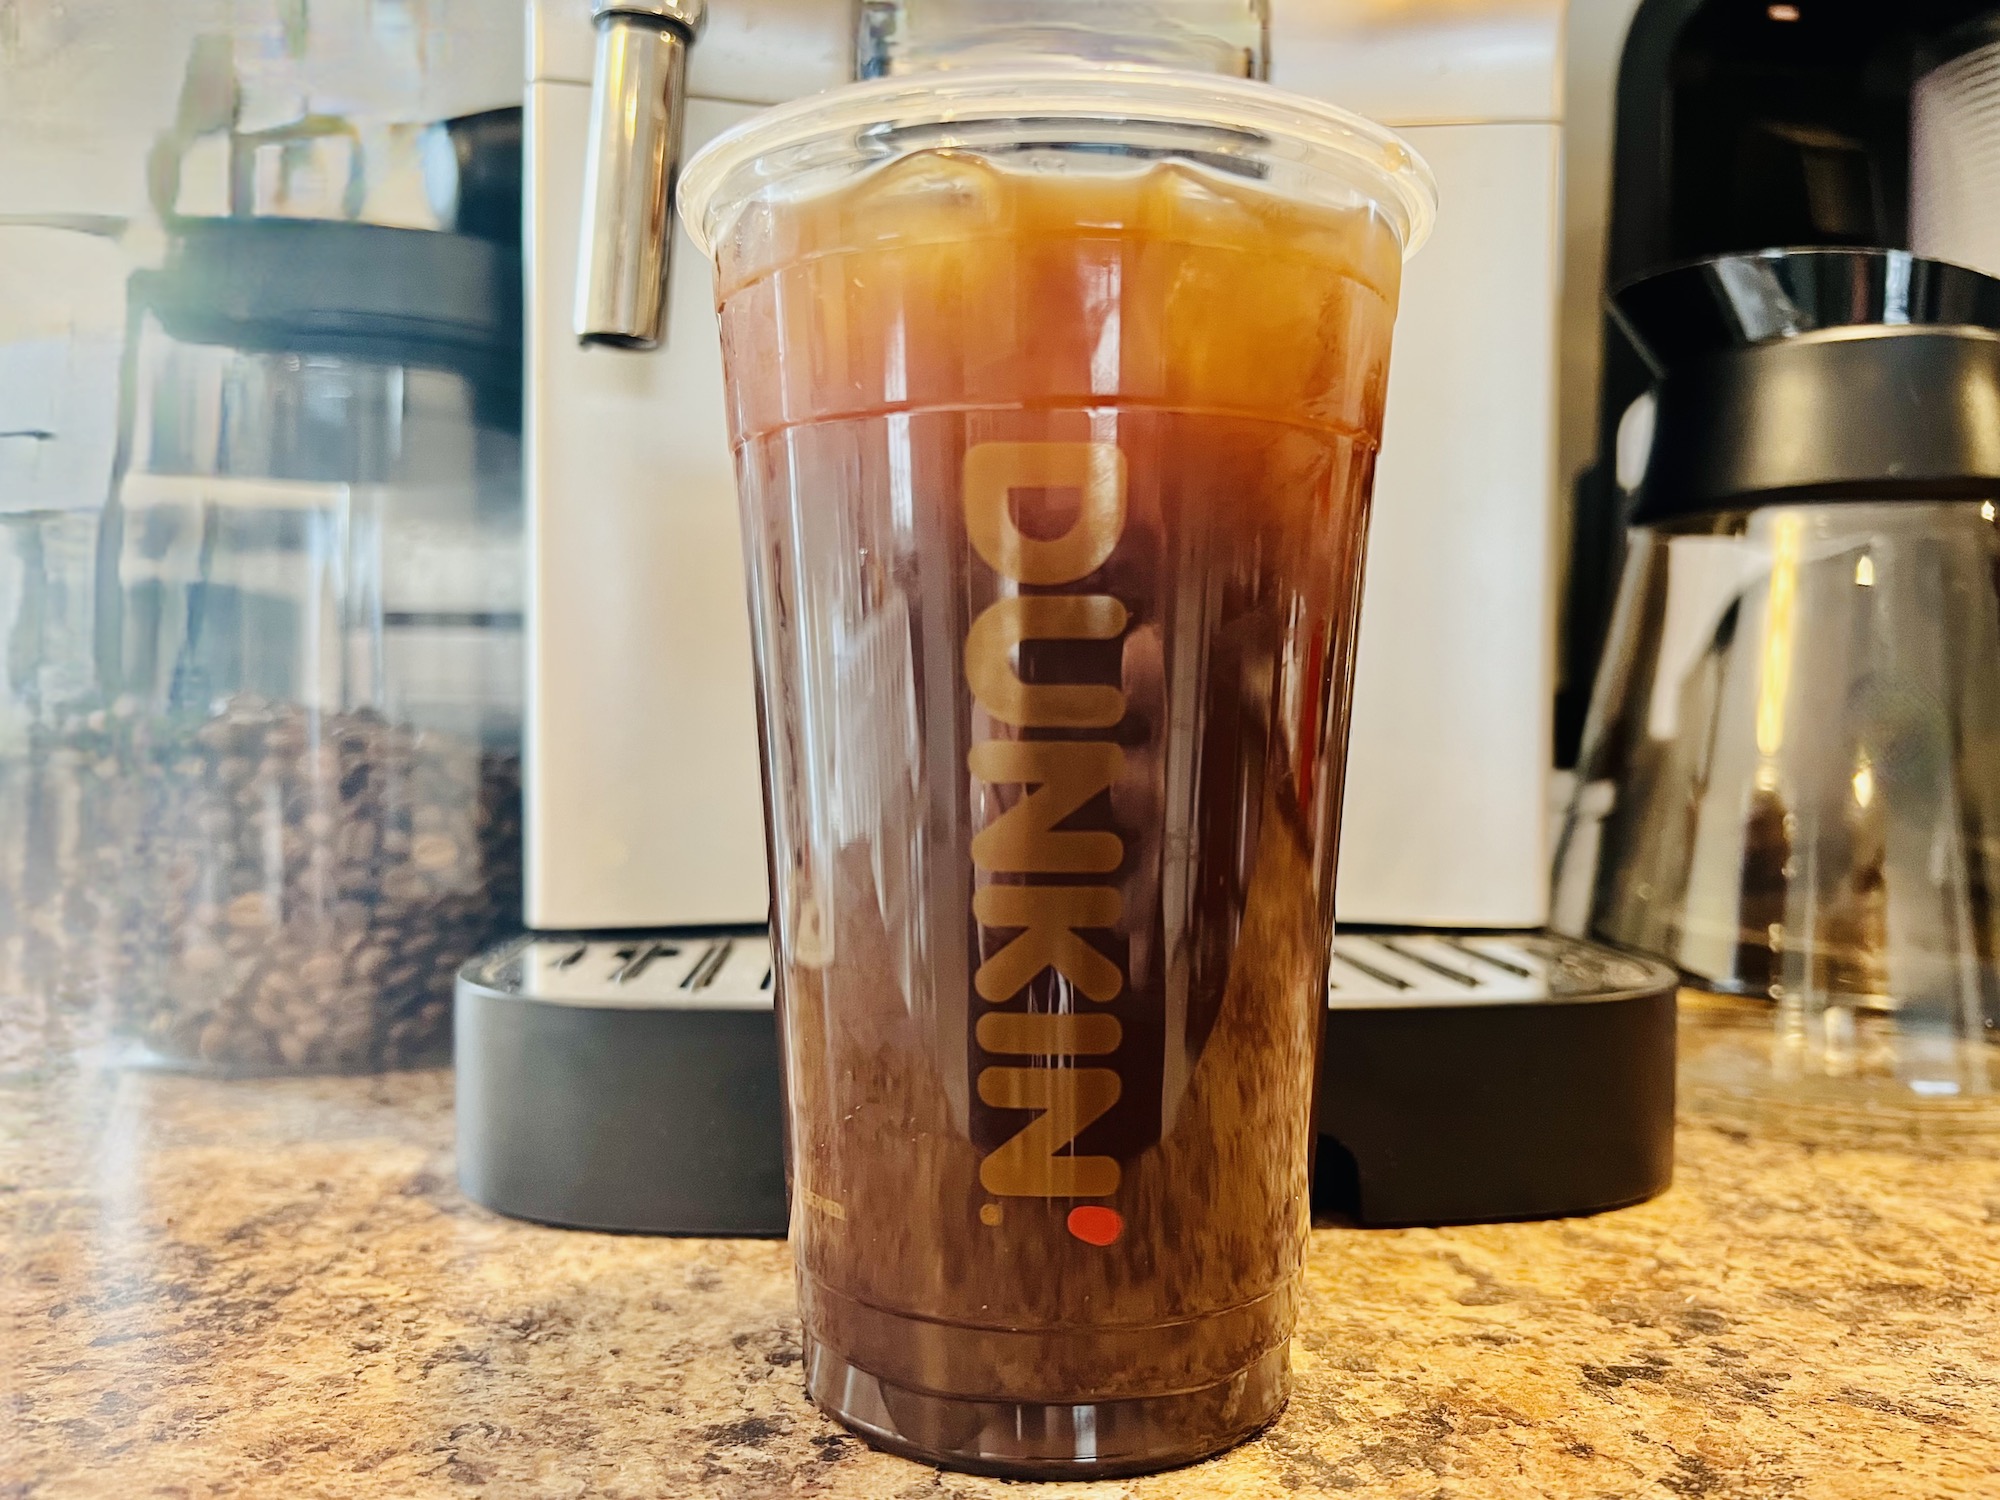 Dunkin’ Brownie Batter Swirl and Iced Coffee Review